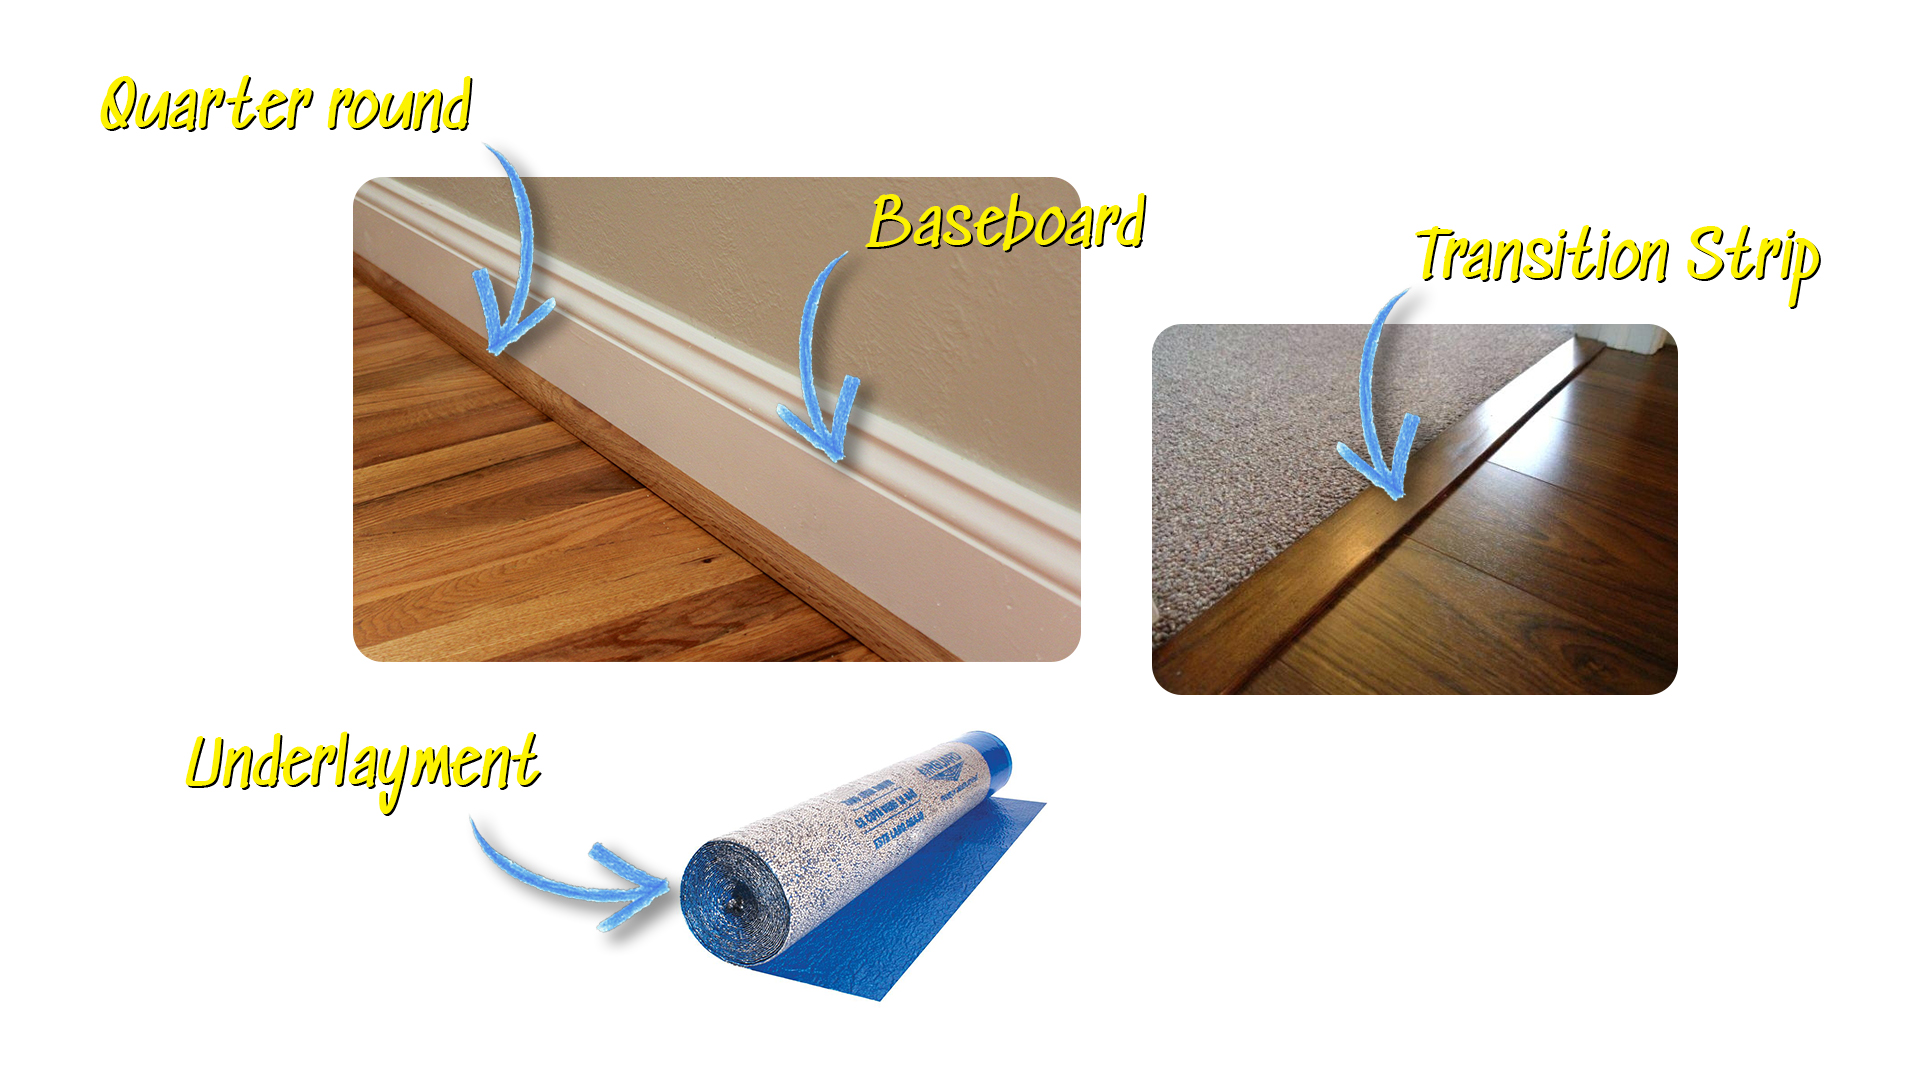 How To Install Laminate Flooring Diy, Laminate Flooring Or Baseboards First